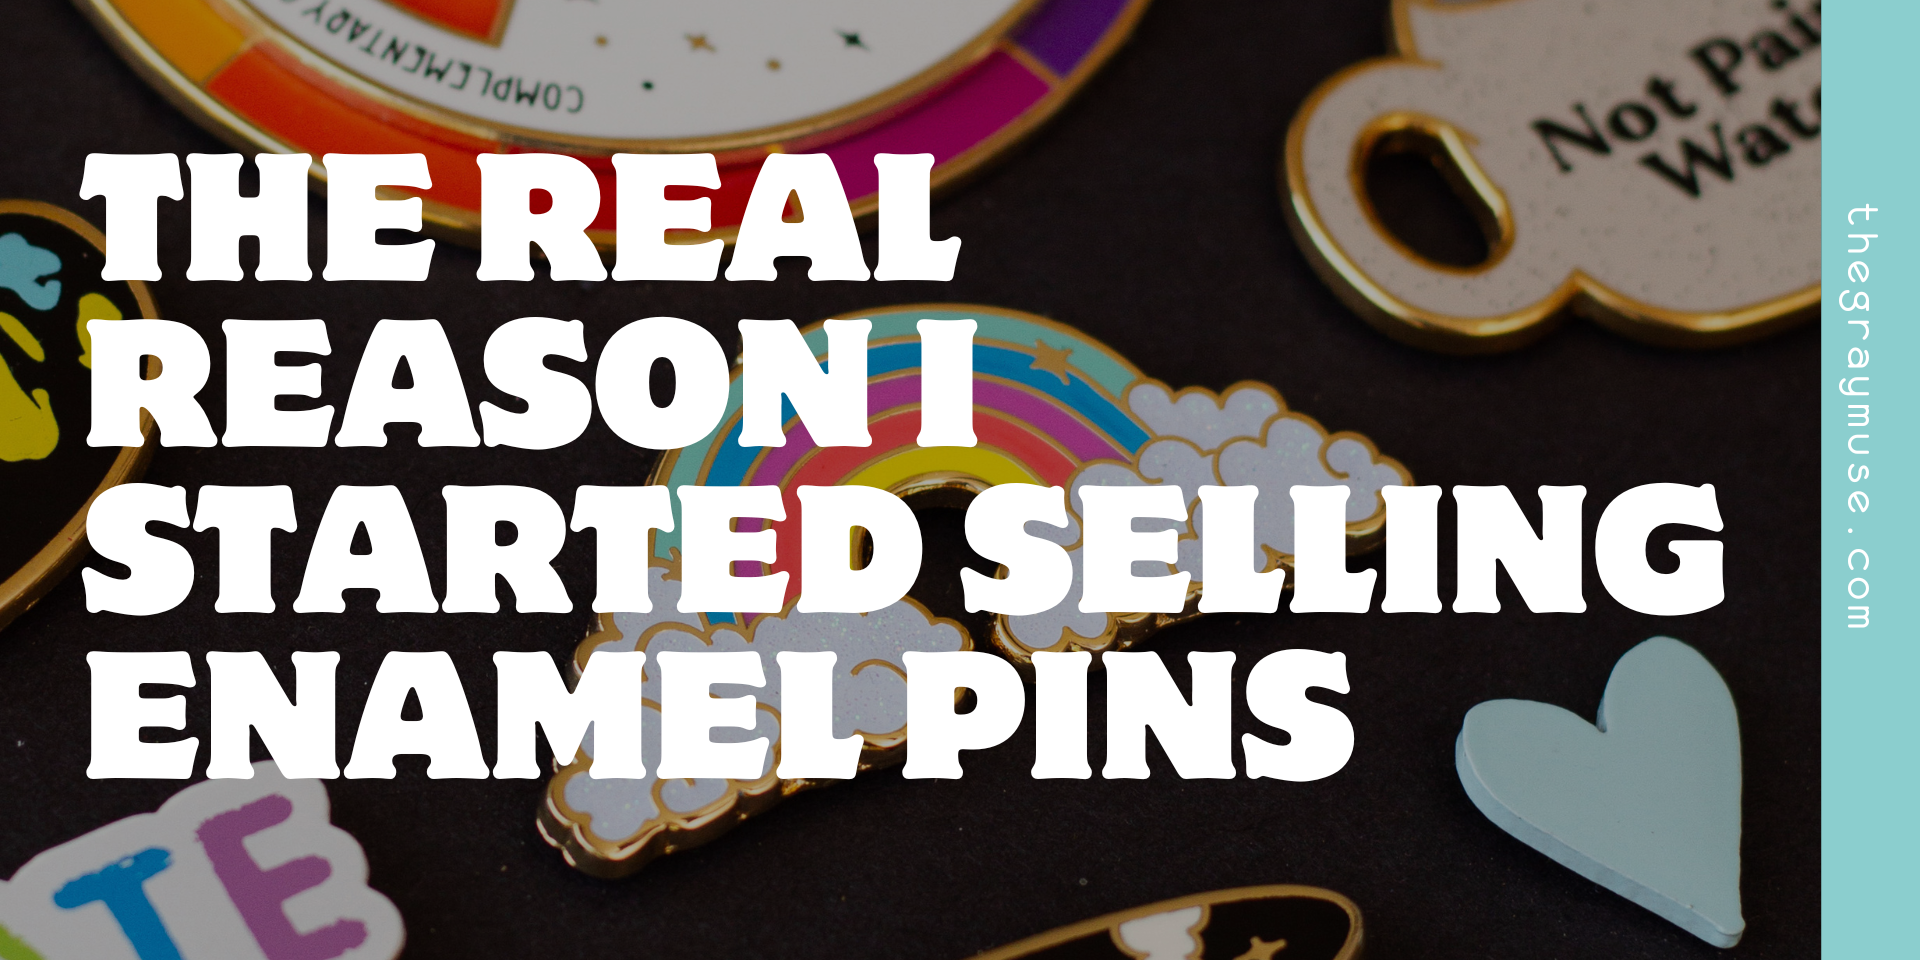 The Real Reason I Started Selling Enamel Pins